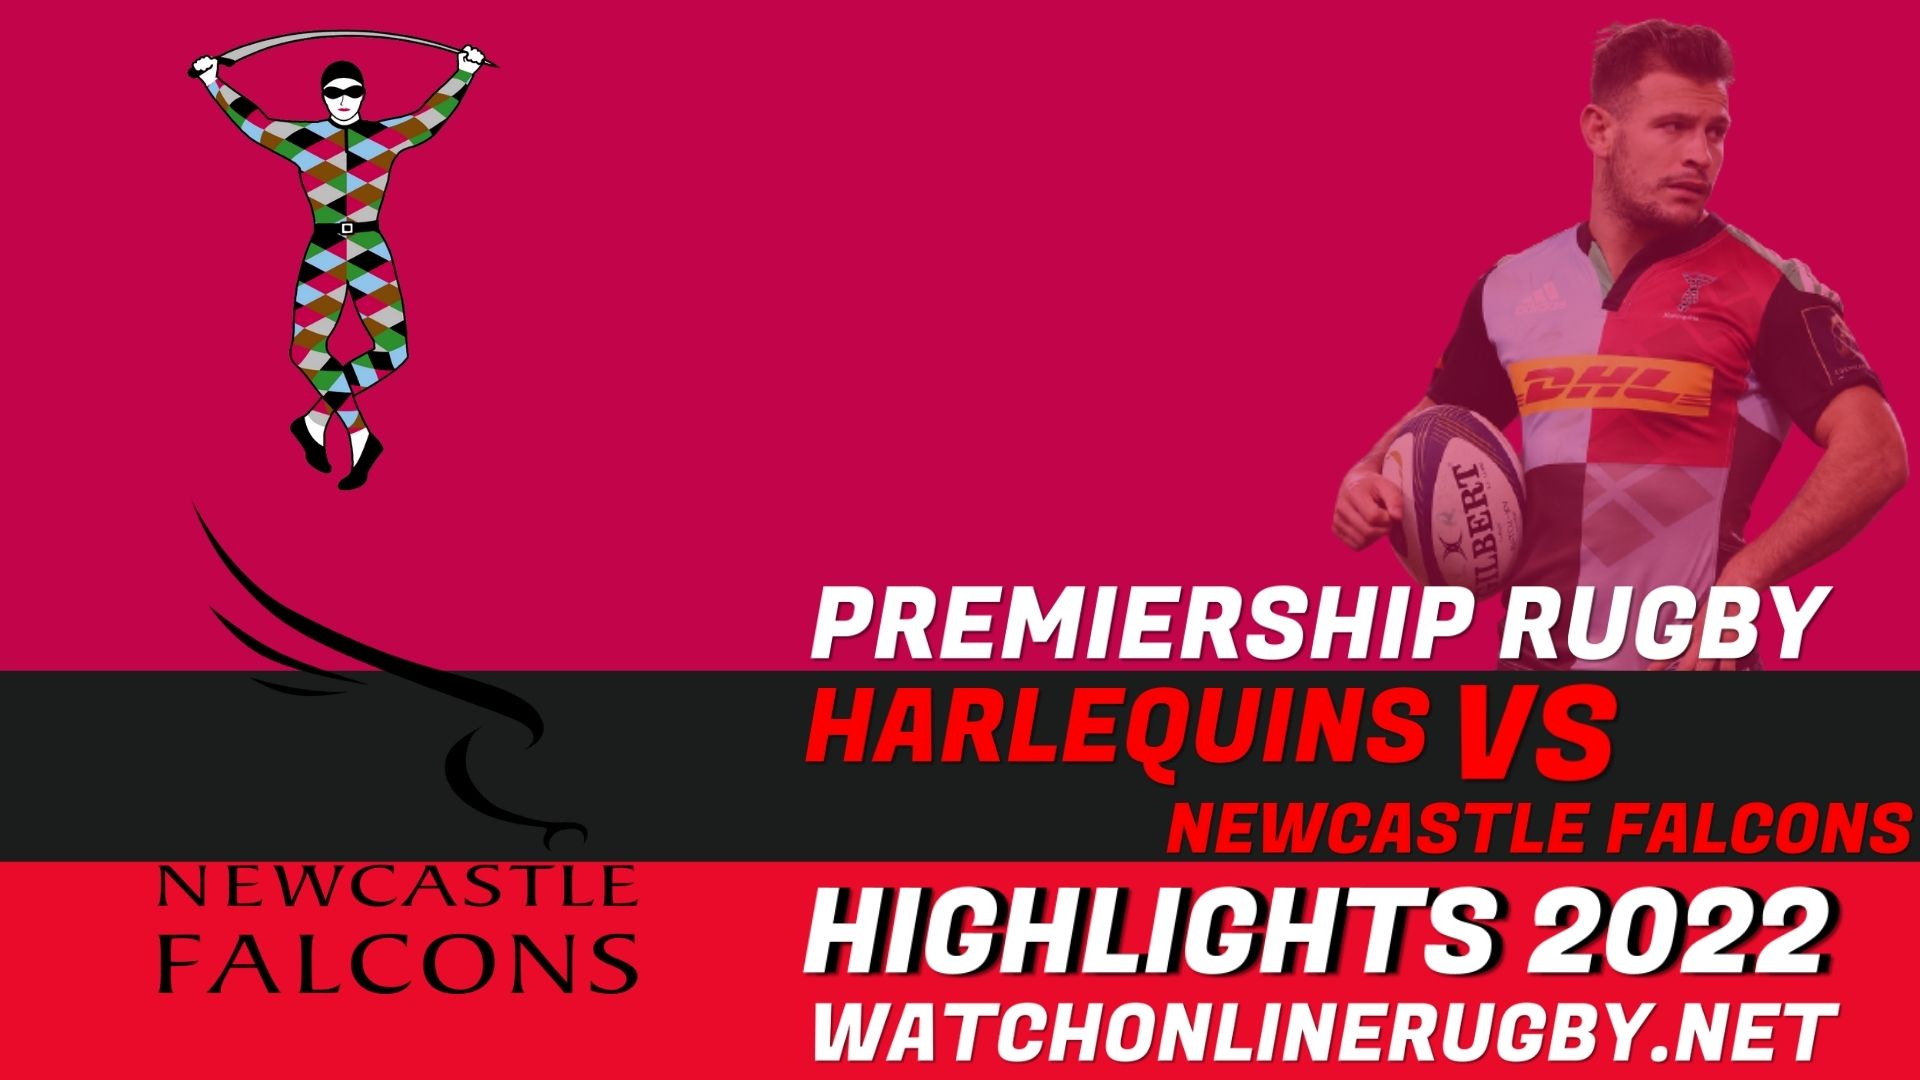 Harlequins Vs Newcastle Falcons Premiership Rugby 2022 RD 19